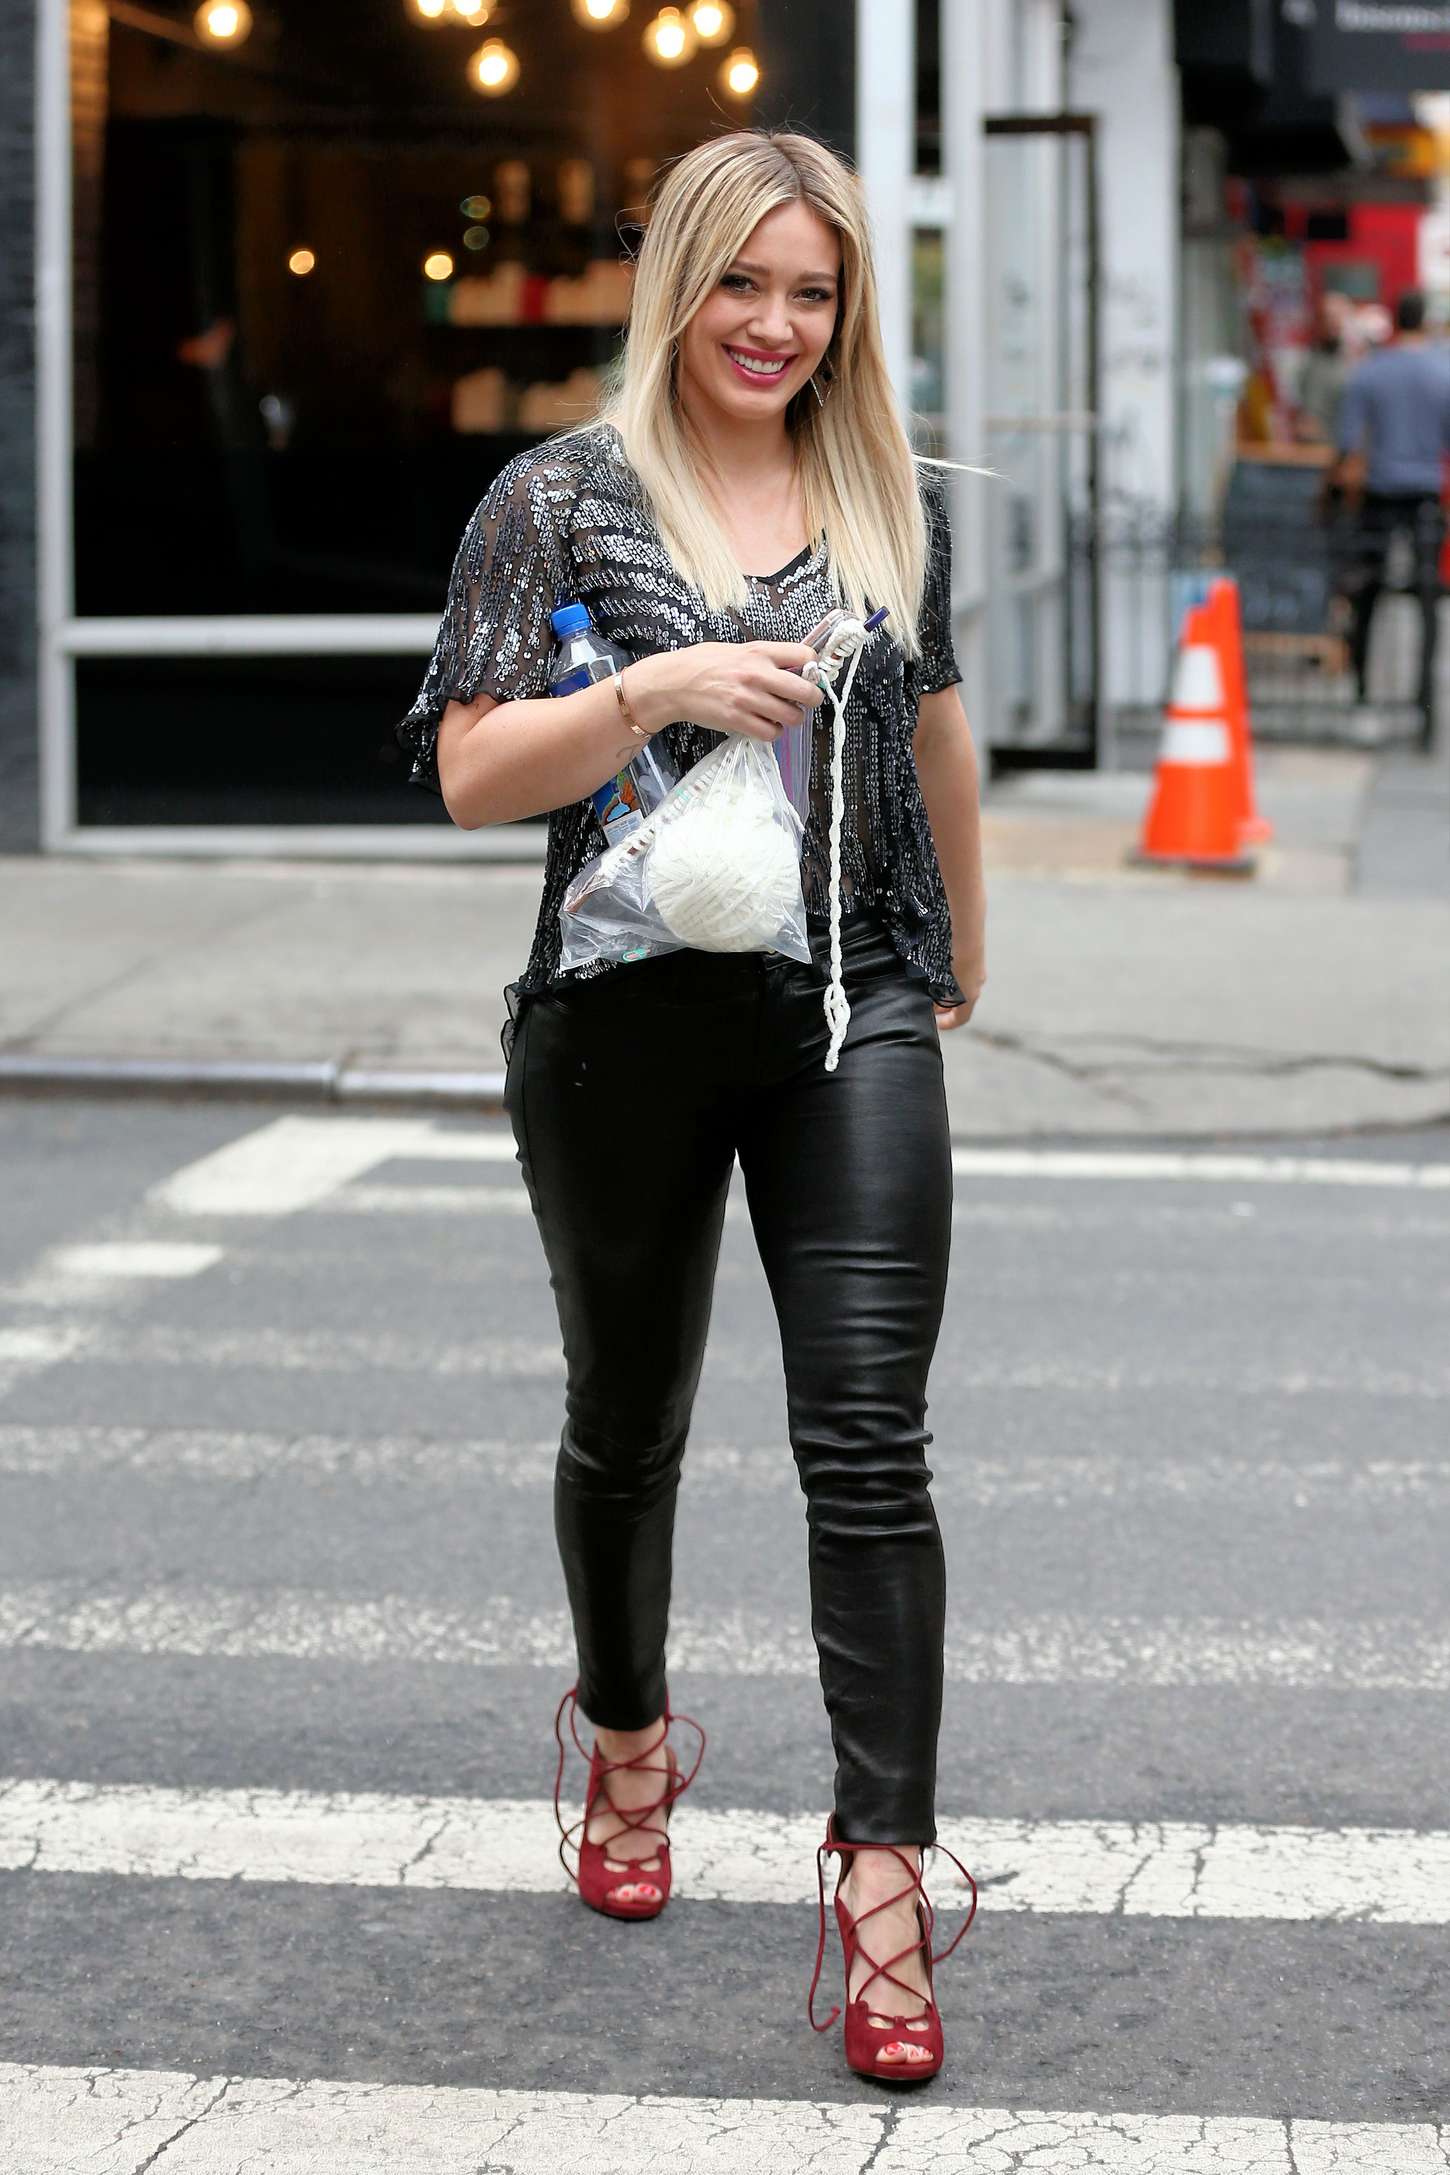 Hilary Duff 2015 : Hilary Duff in Leather Pants on Younger set -07